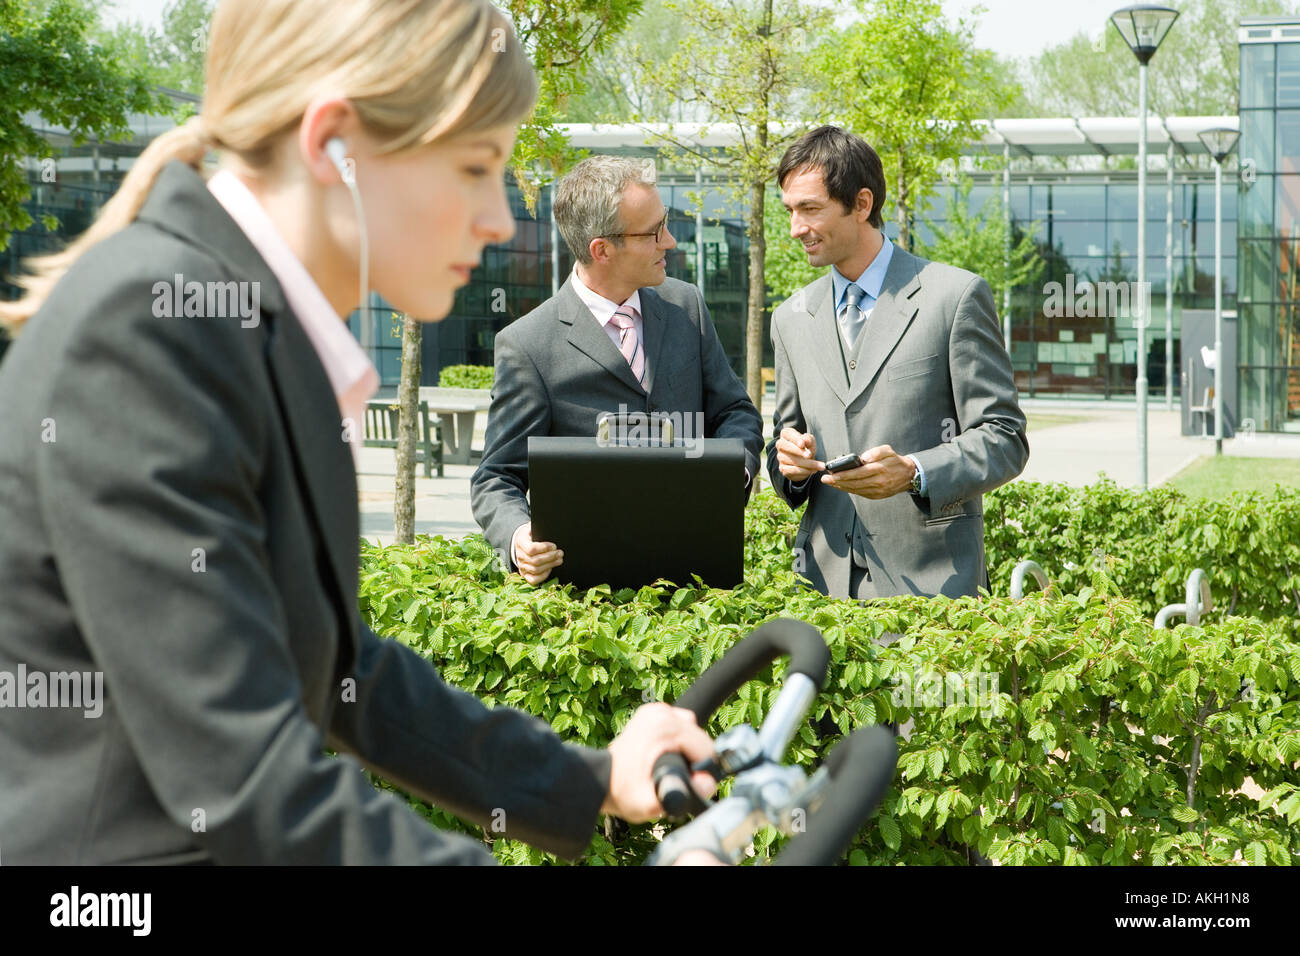 Woman on bike, two businessmen on background Stock Photo